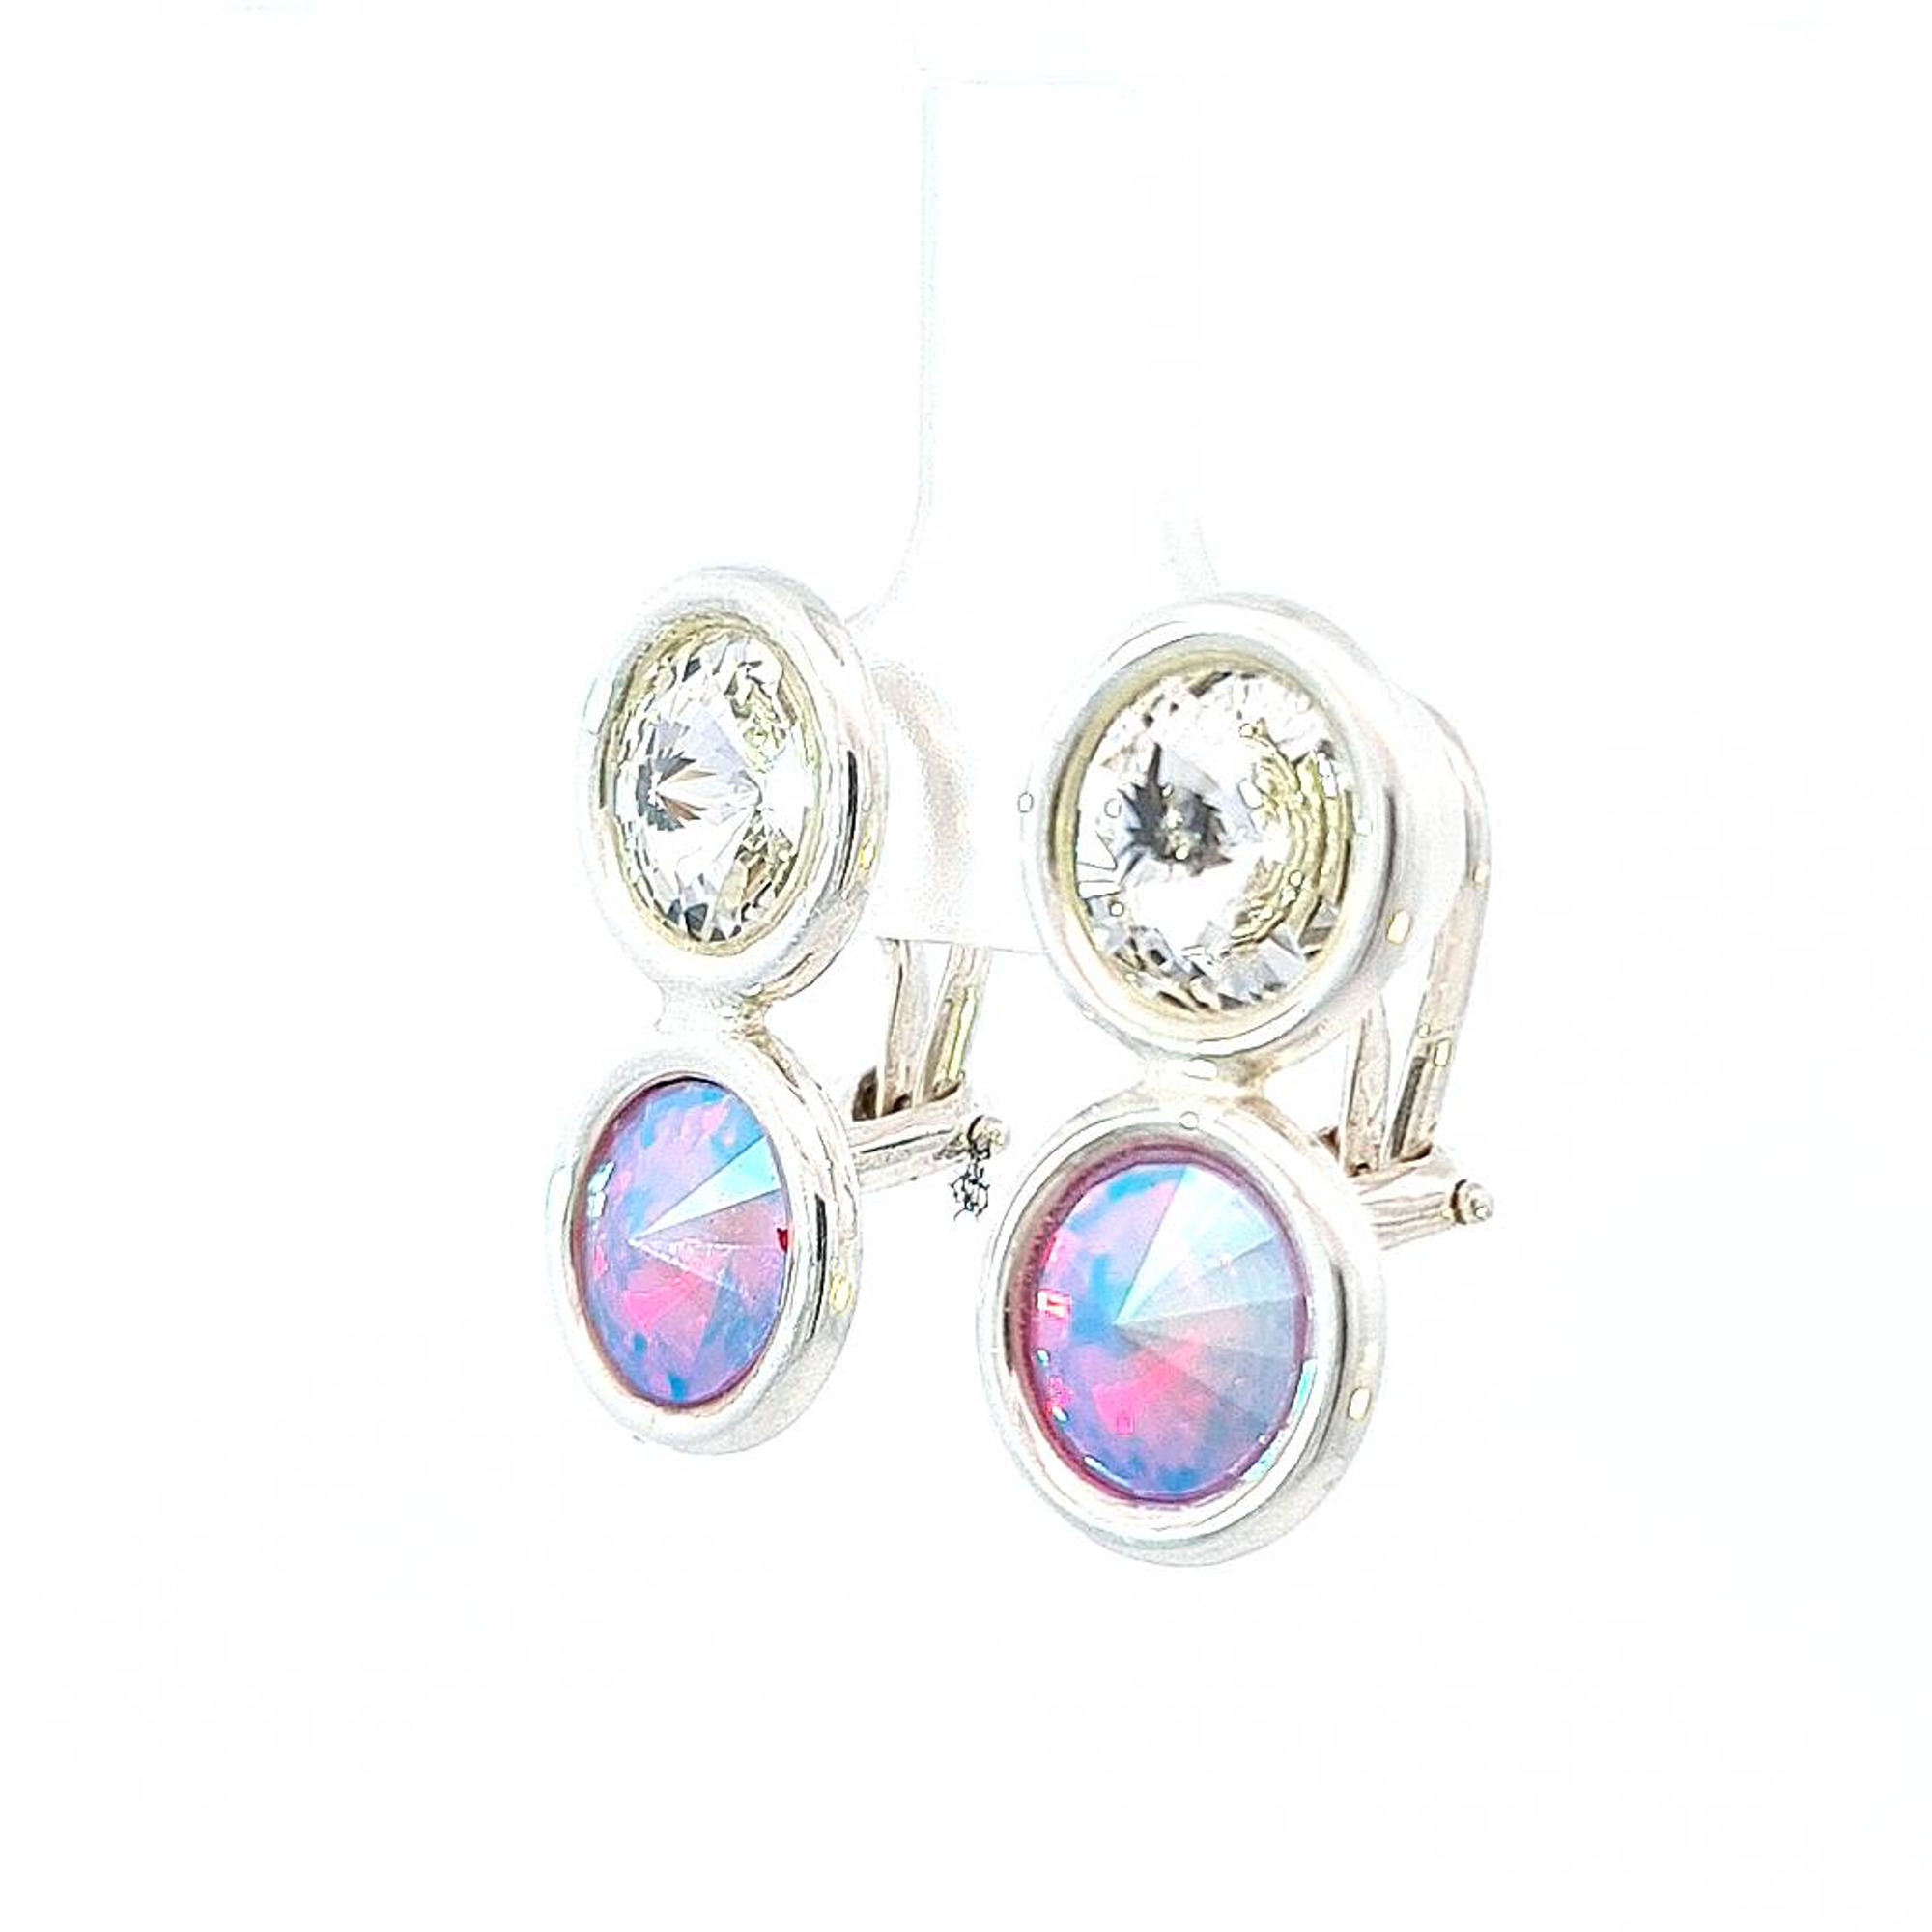 Alternate side view of Magpie Gems' sterling silver earrings with a glimpse of the clip-on mechanism and the depth of the coloured rivoli crystal.